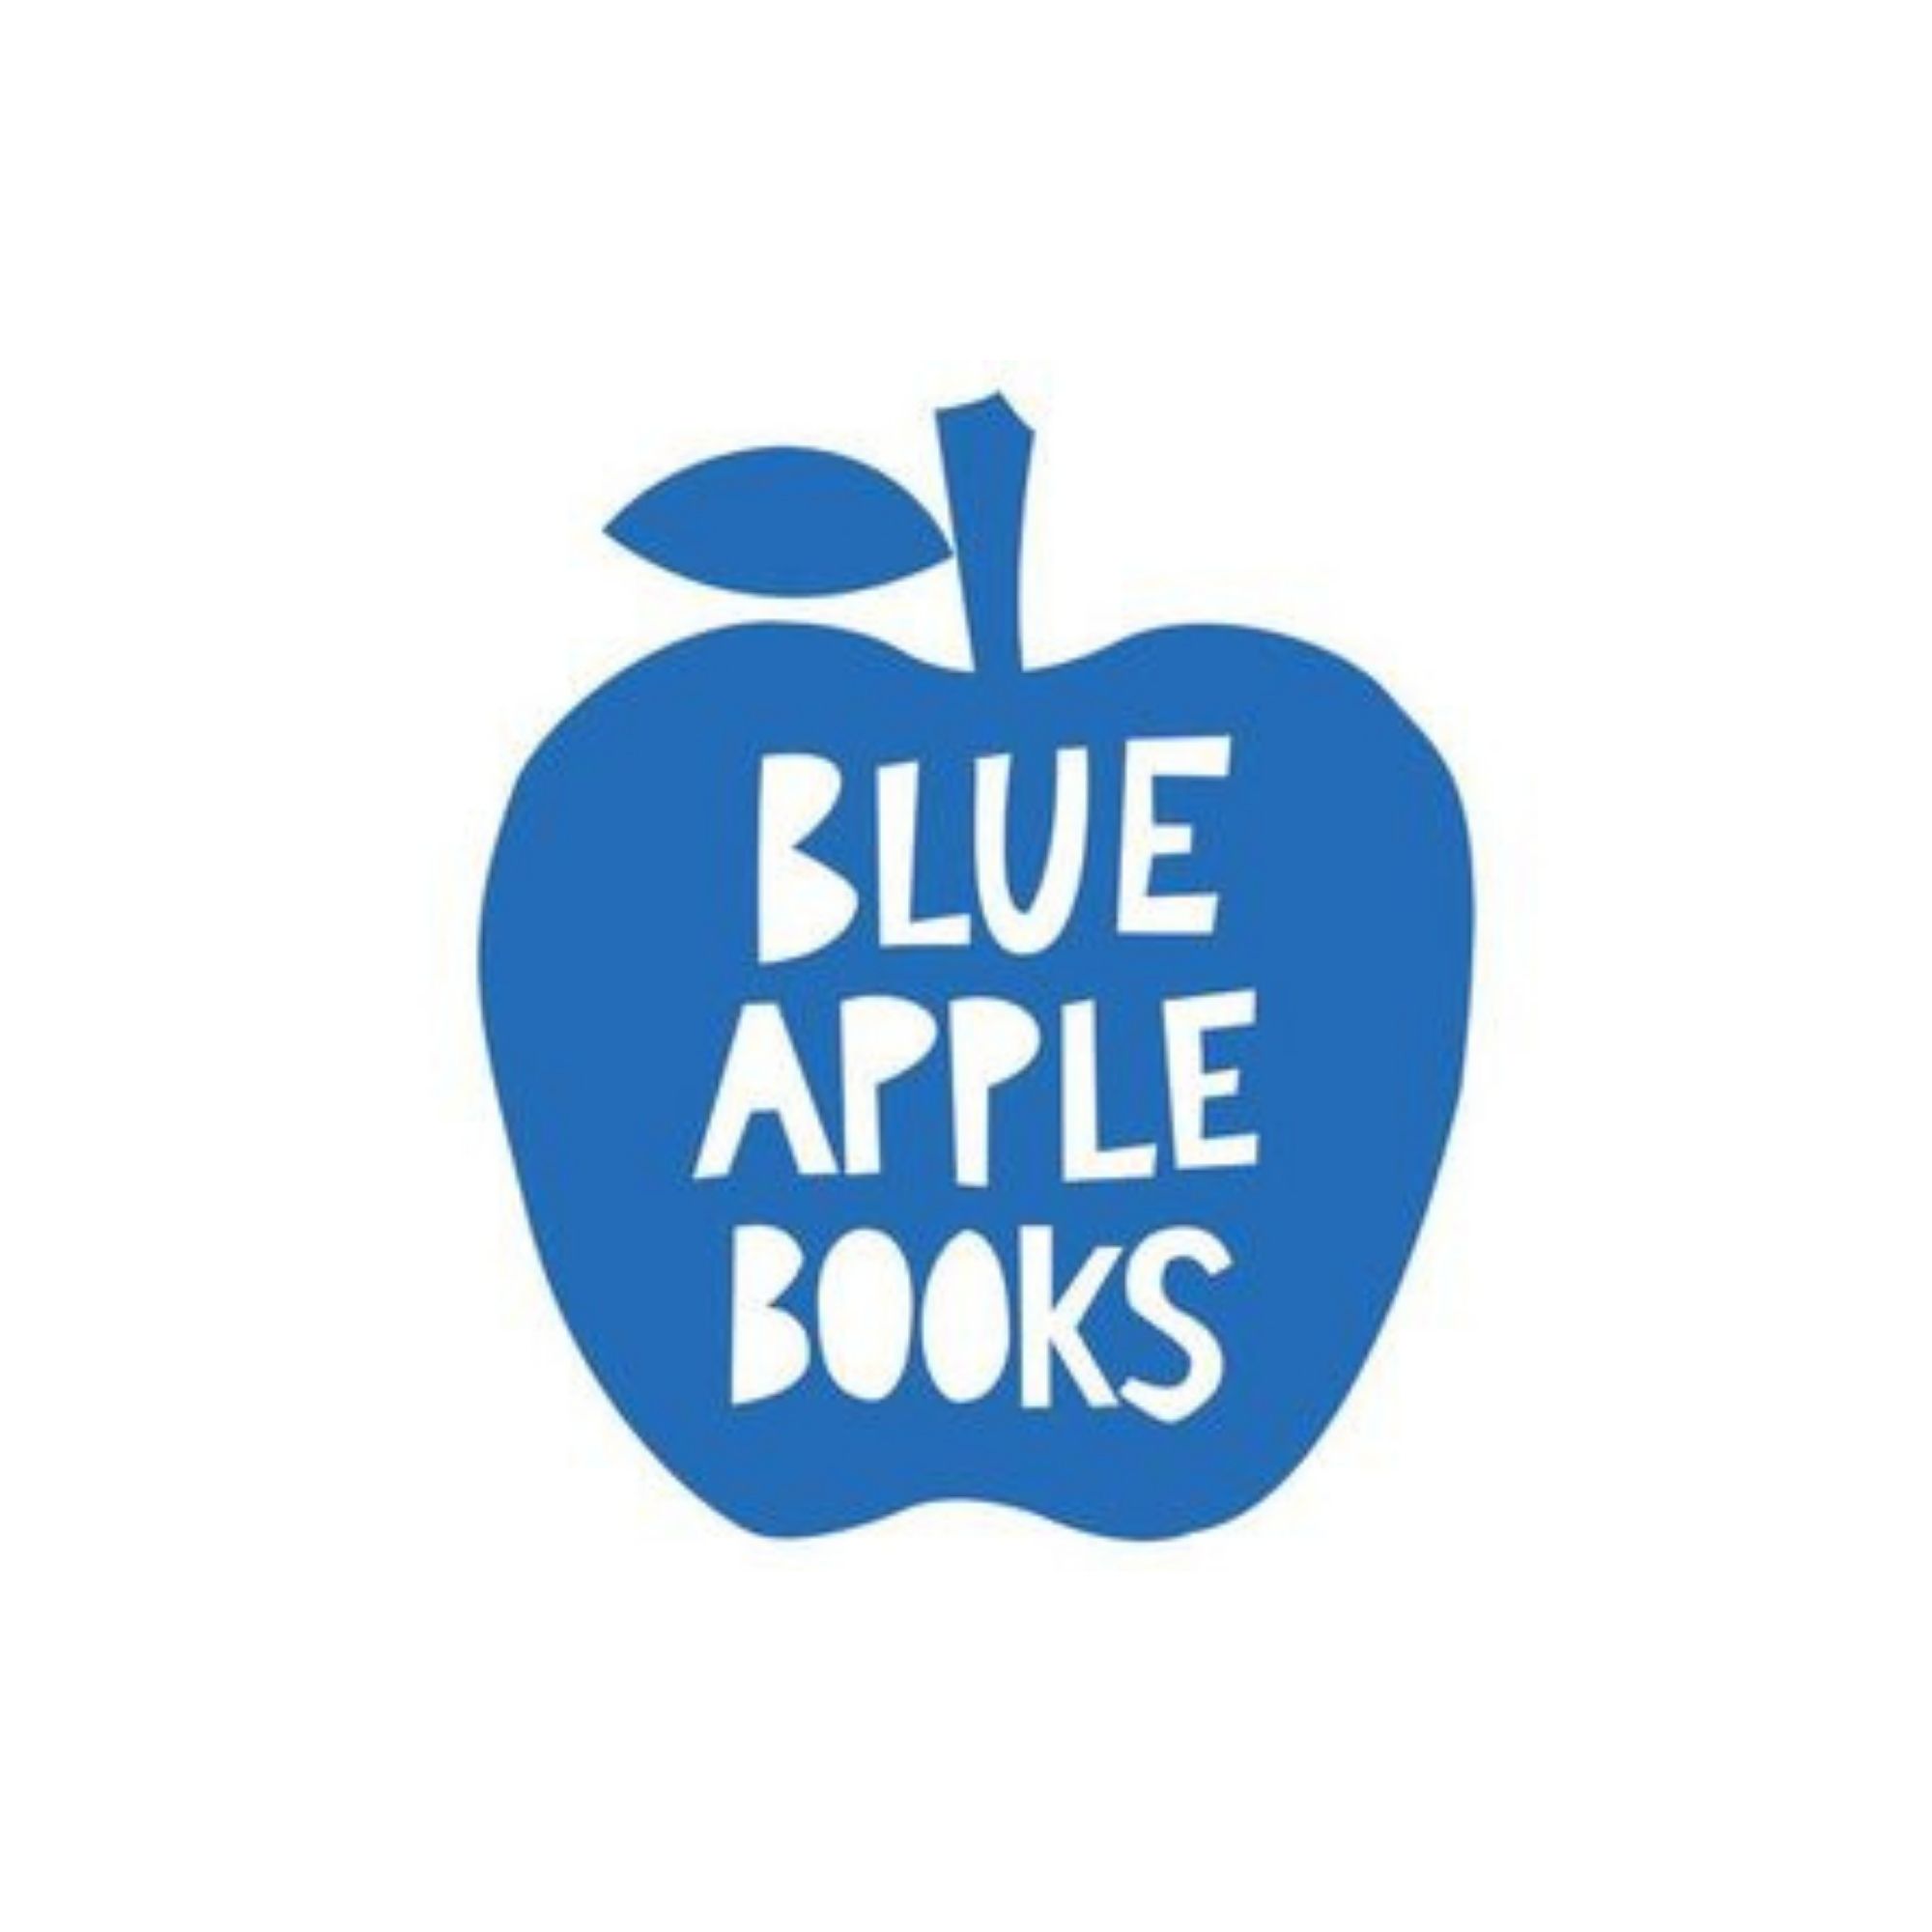 THE RIGHTS SOLUTION - BLUE APPLE BOOKS